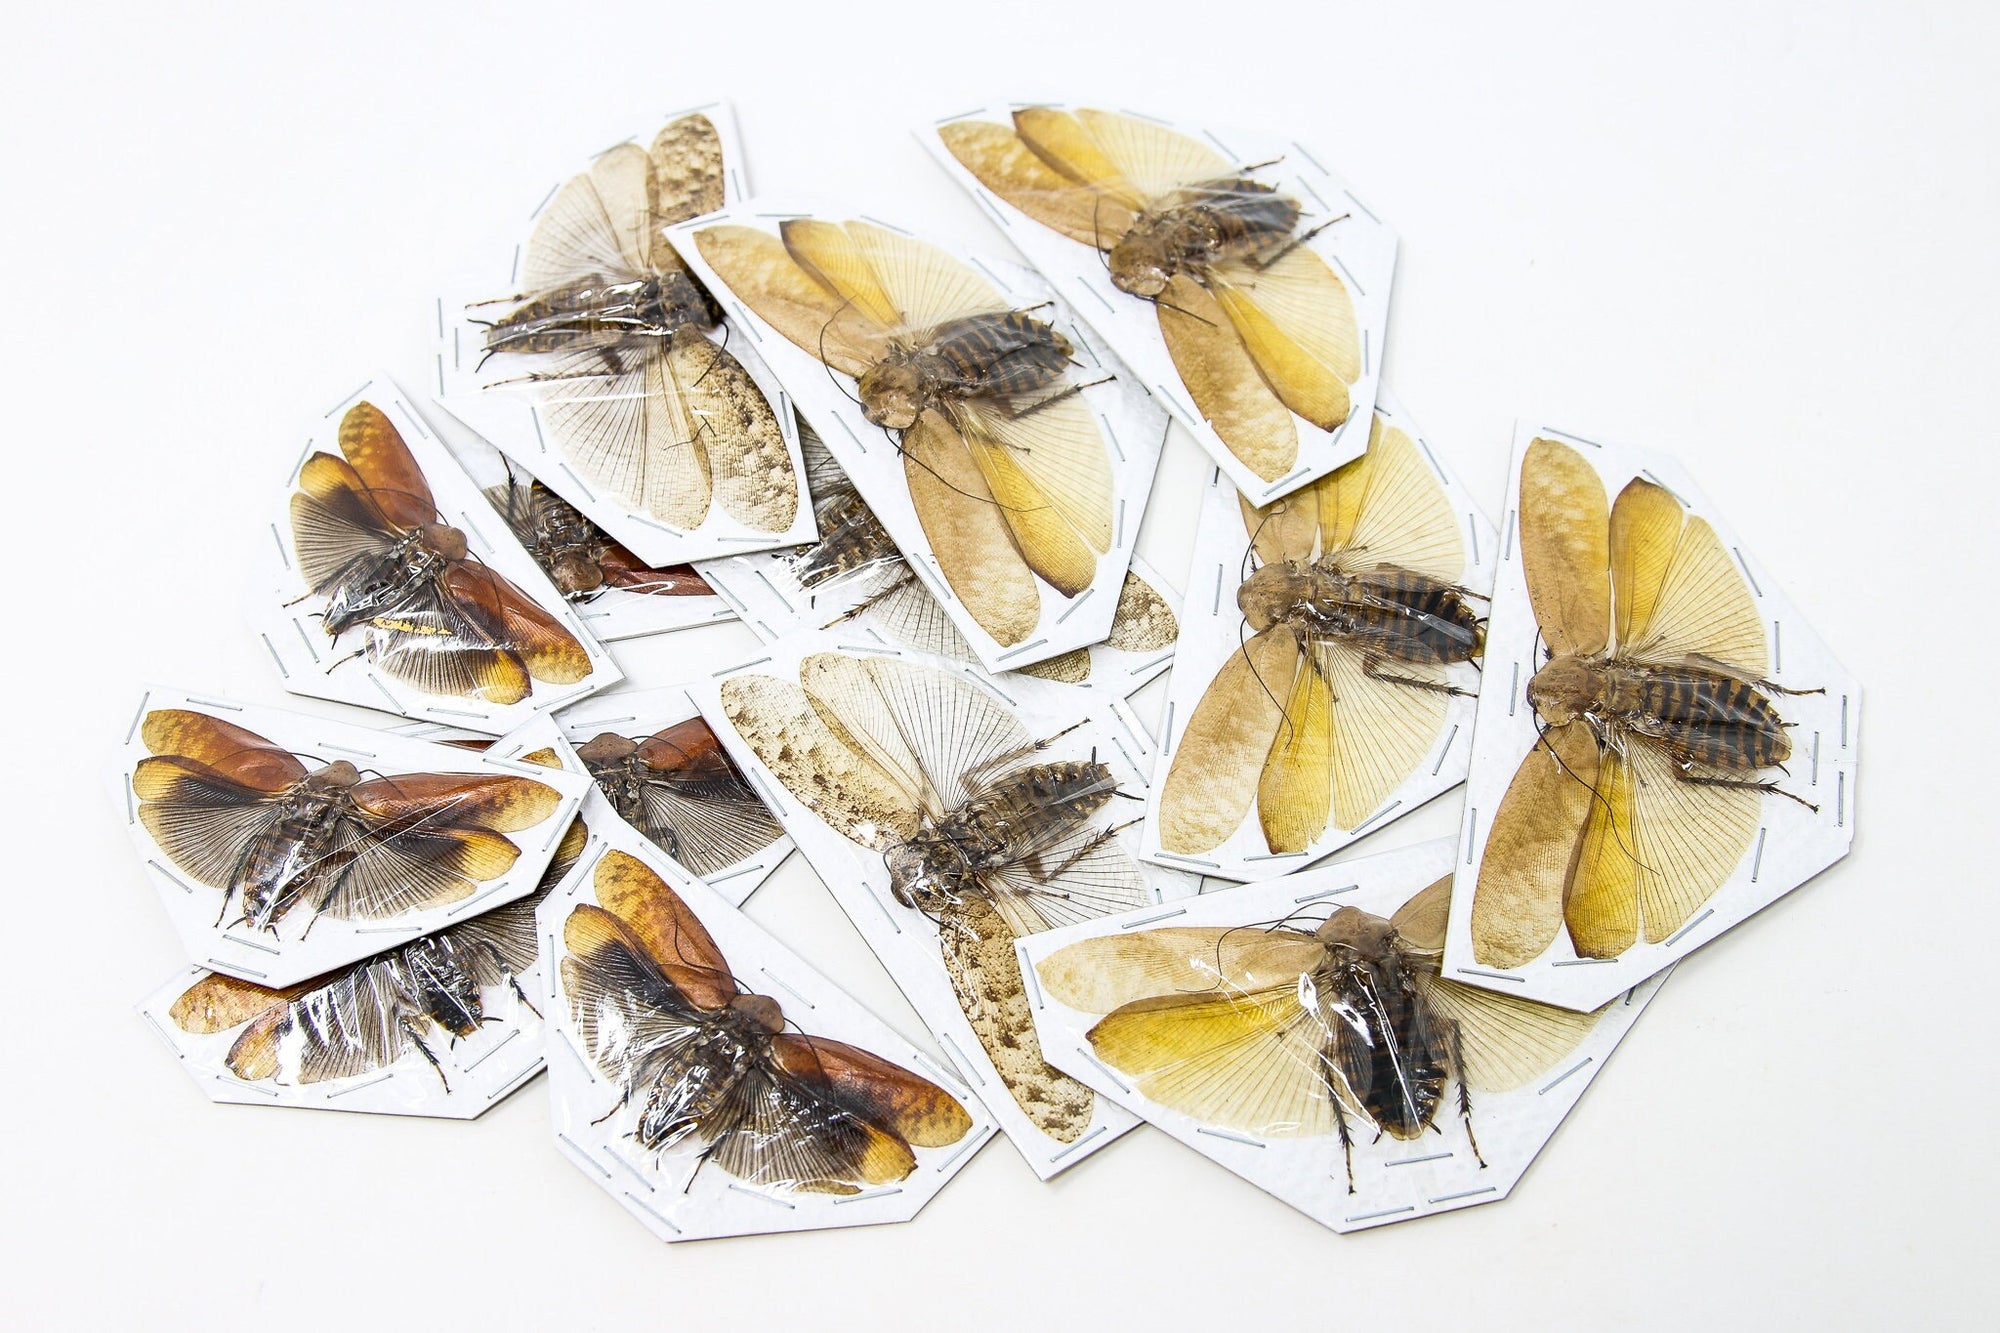 TWO (2) Spread Cockroach's Ideal for Framing & Taxidermy | A1/A1- Large 70-85mm | Dry-preserved Entomology Specimens